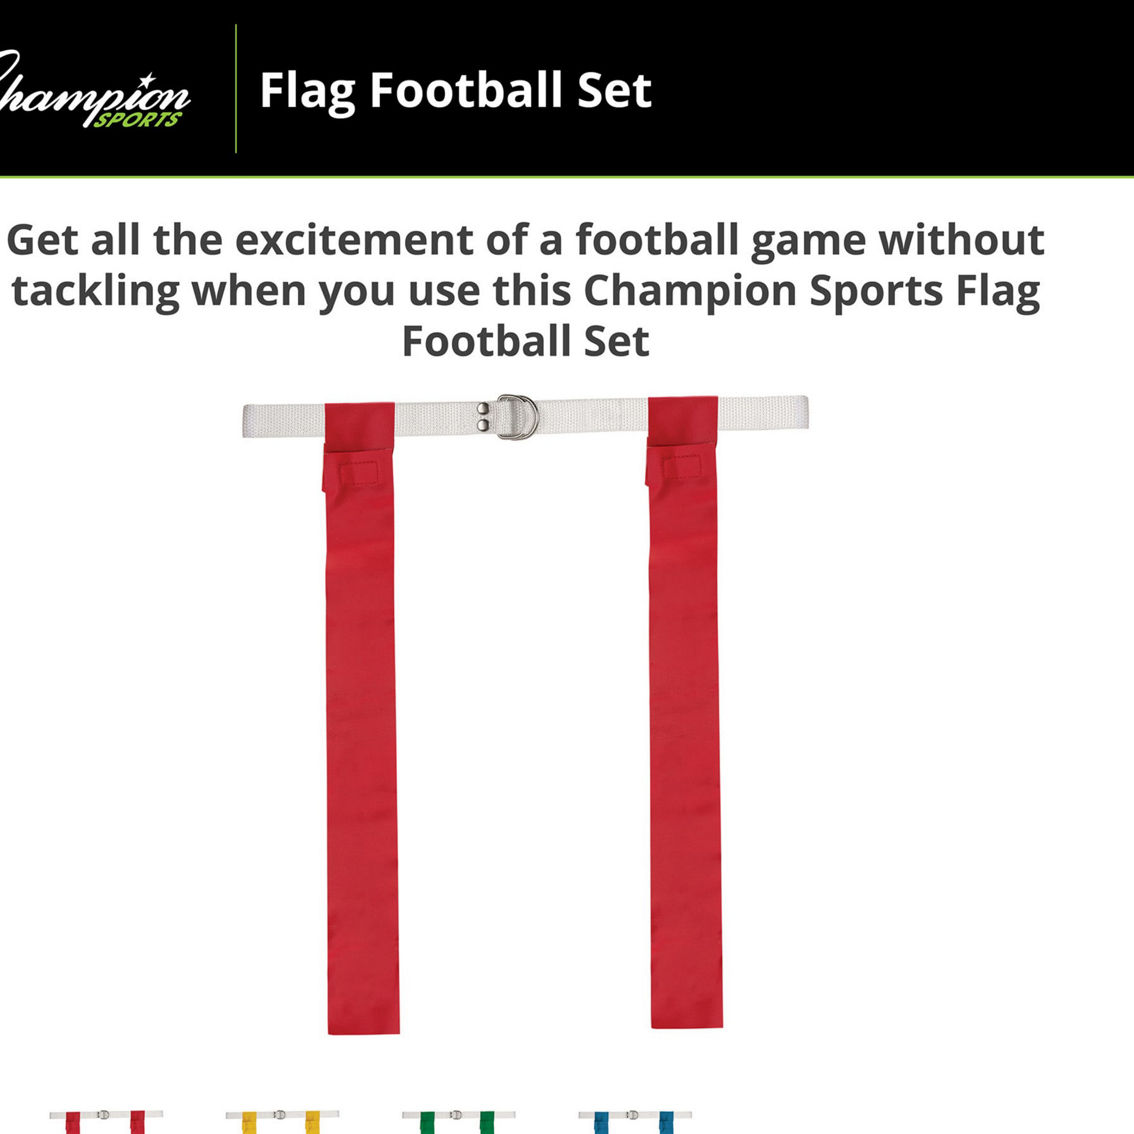 Champion Sports Flag Football Set, Red, Pack of 12 - Image 2 of 5